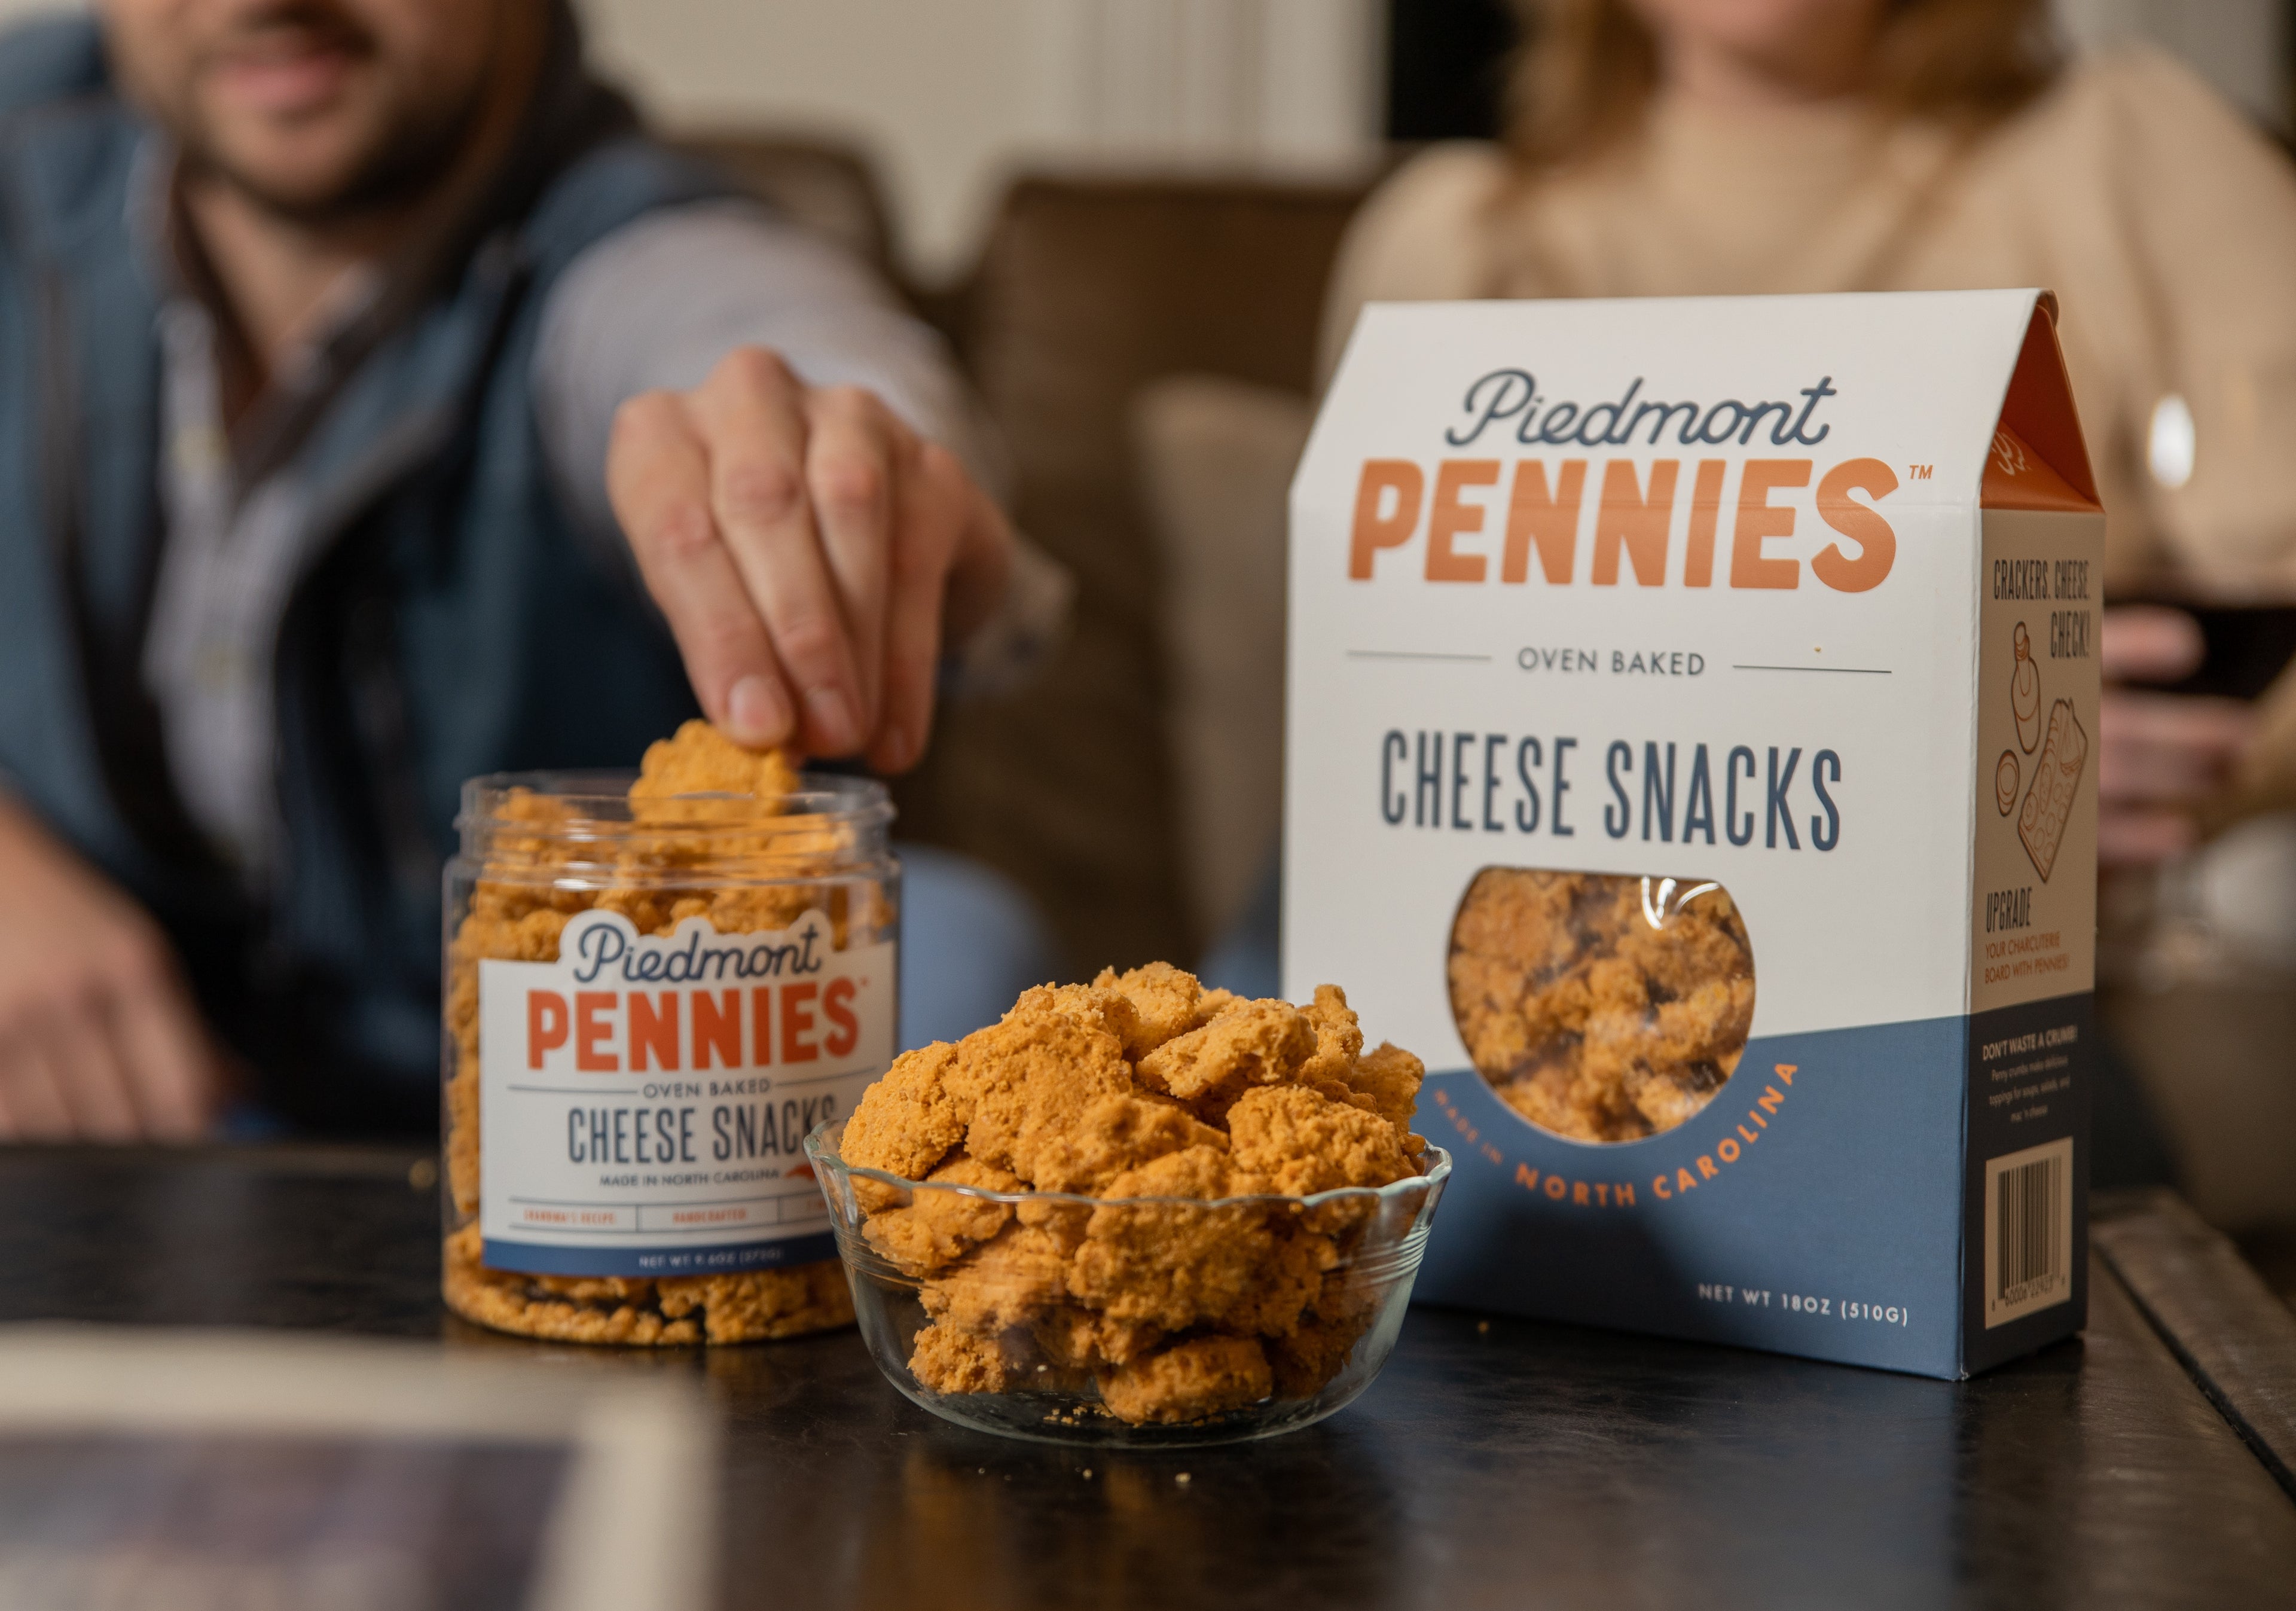 Piedmont Pennies are the perfect snack to share with family